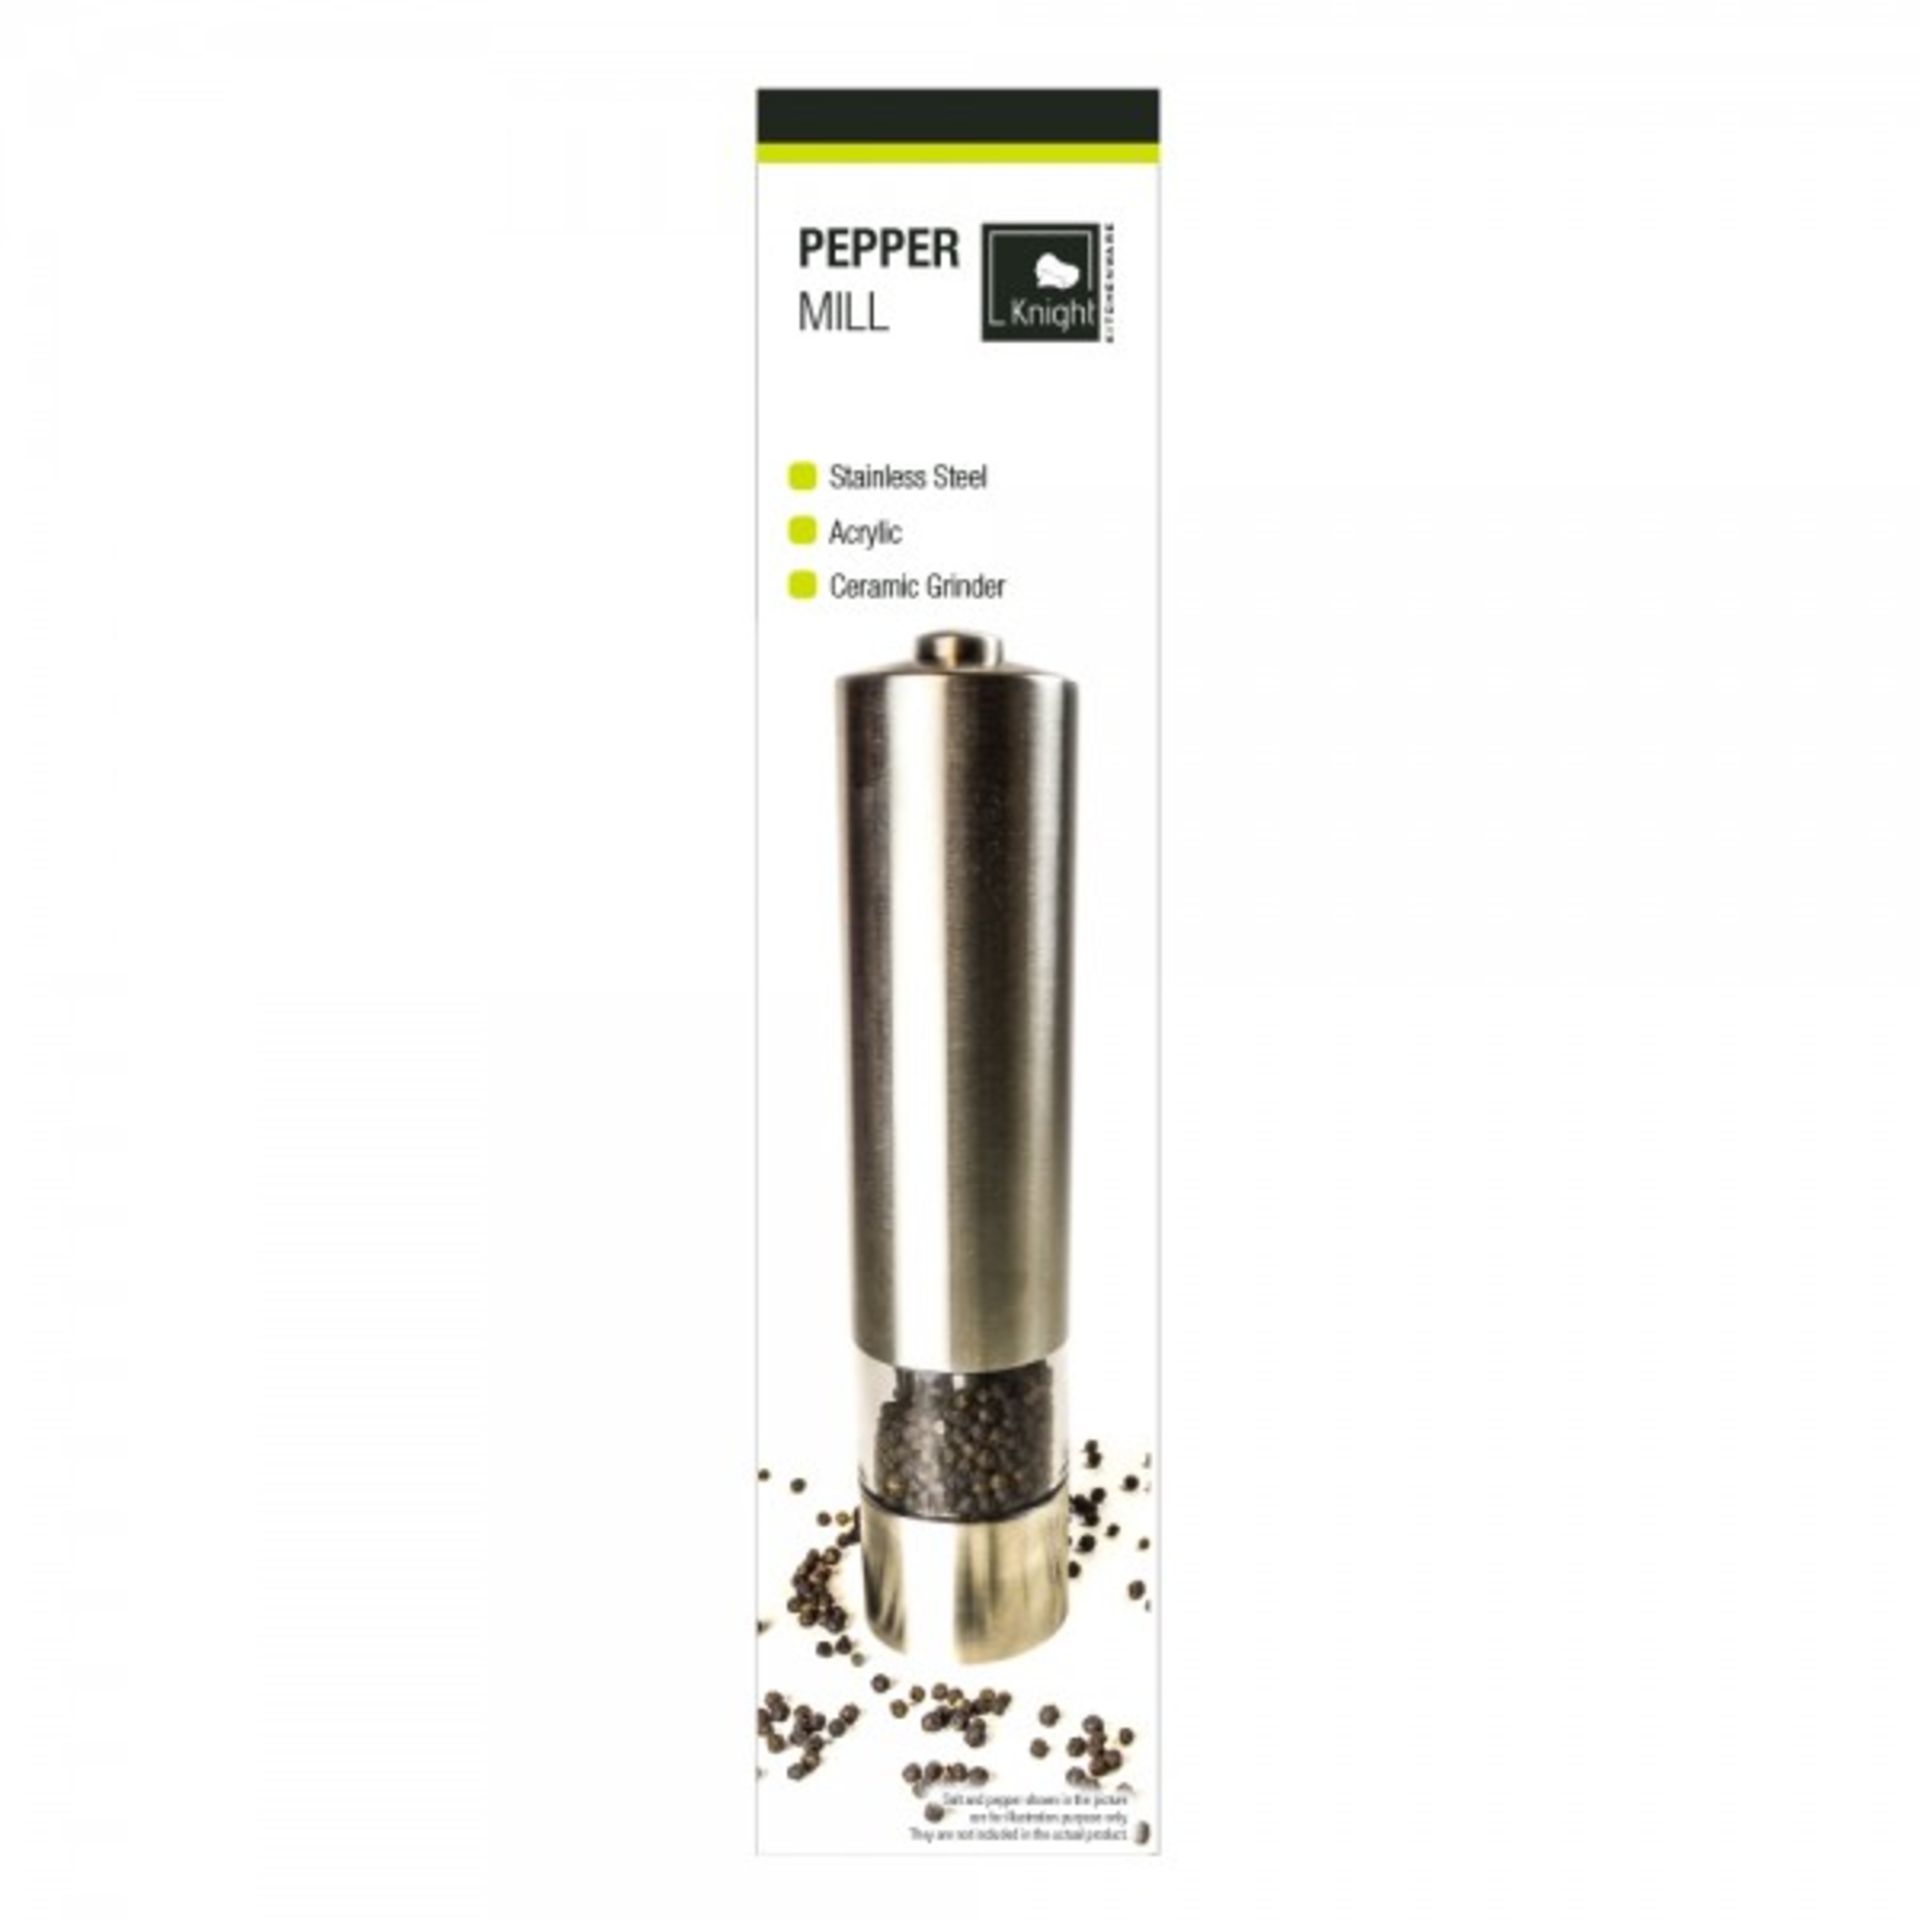 V *TRADE QTY* Brand New Electric Stainless Steel Pepper Mill ISP £14.99 (Coopers Of Stortford) X 4